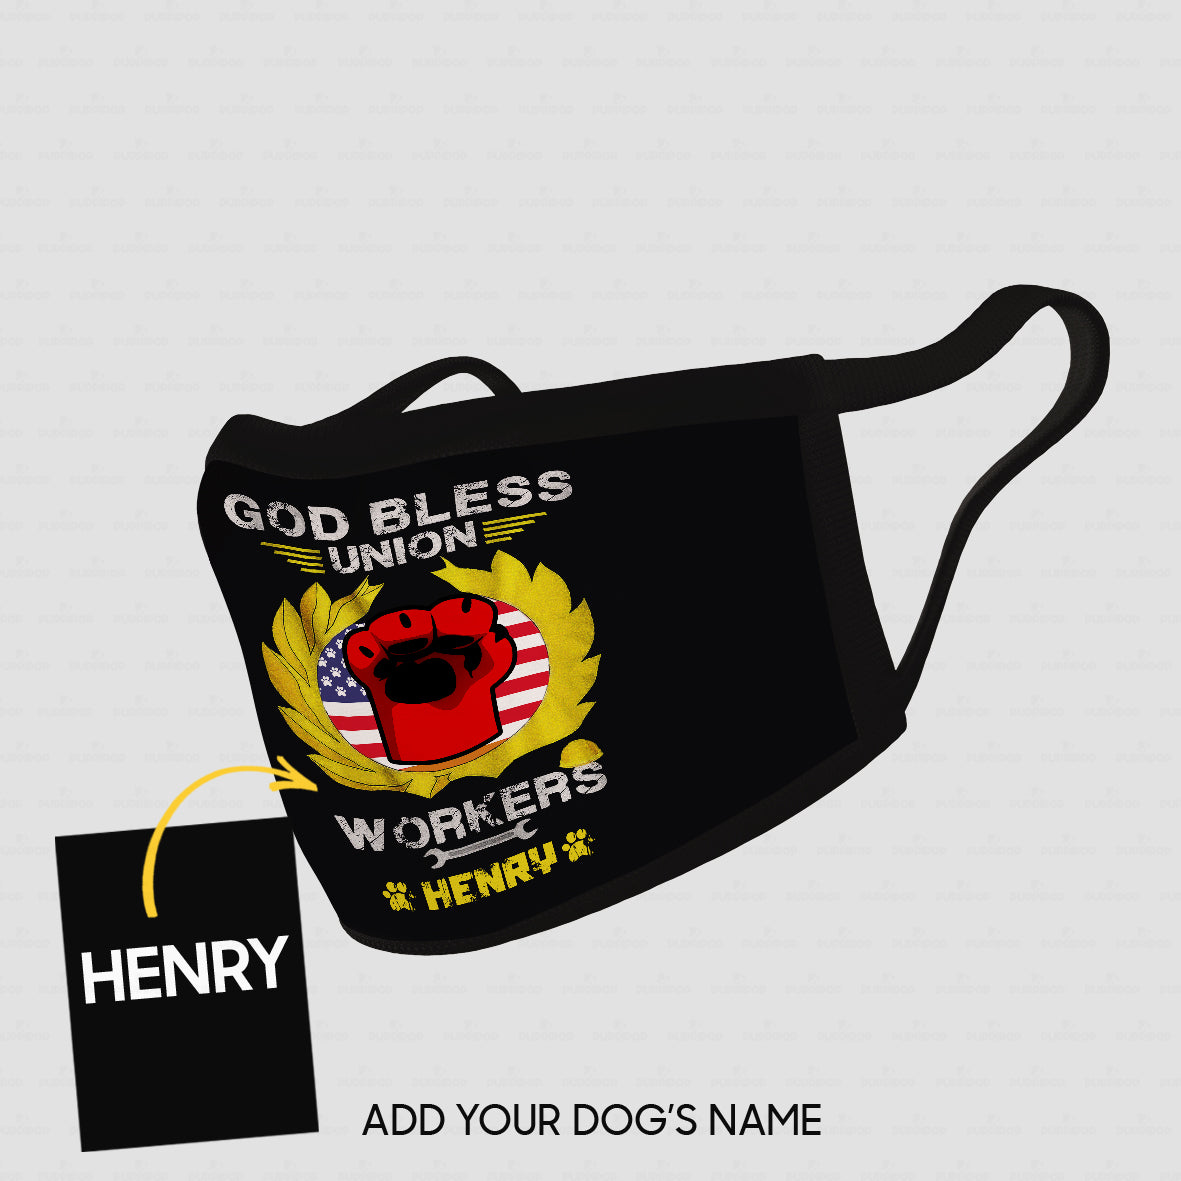 Personalized Dog Mask Gift Idea - God Bless Workers Union For Dog Lovers - Cloth Mask